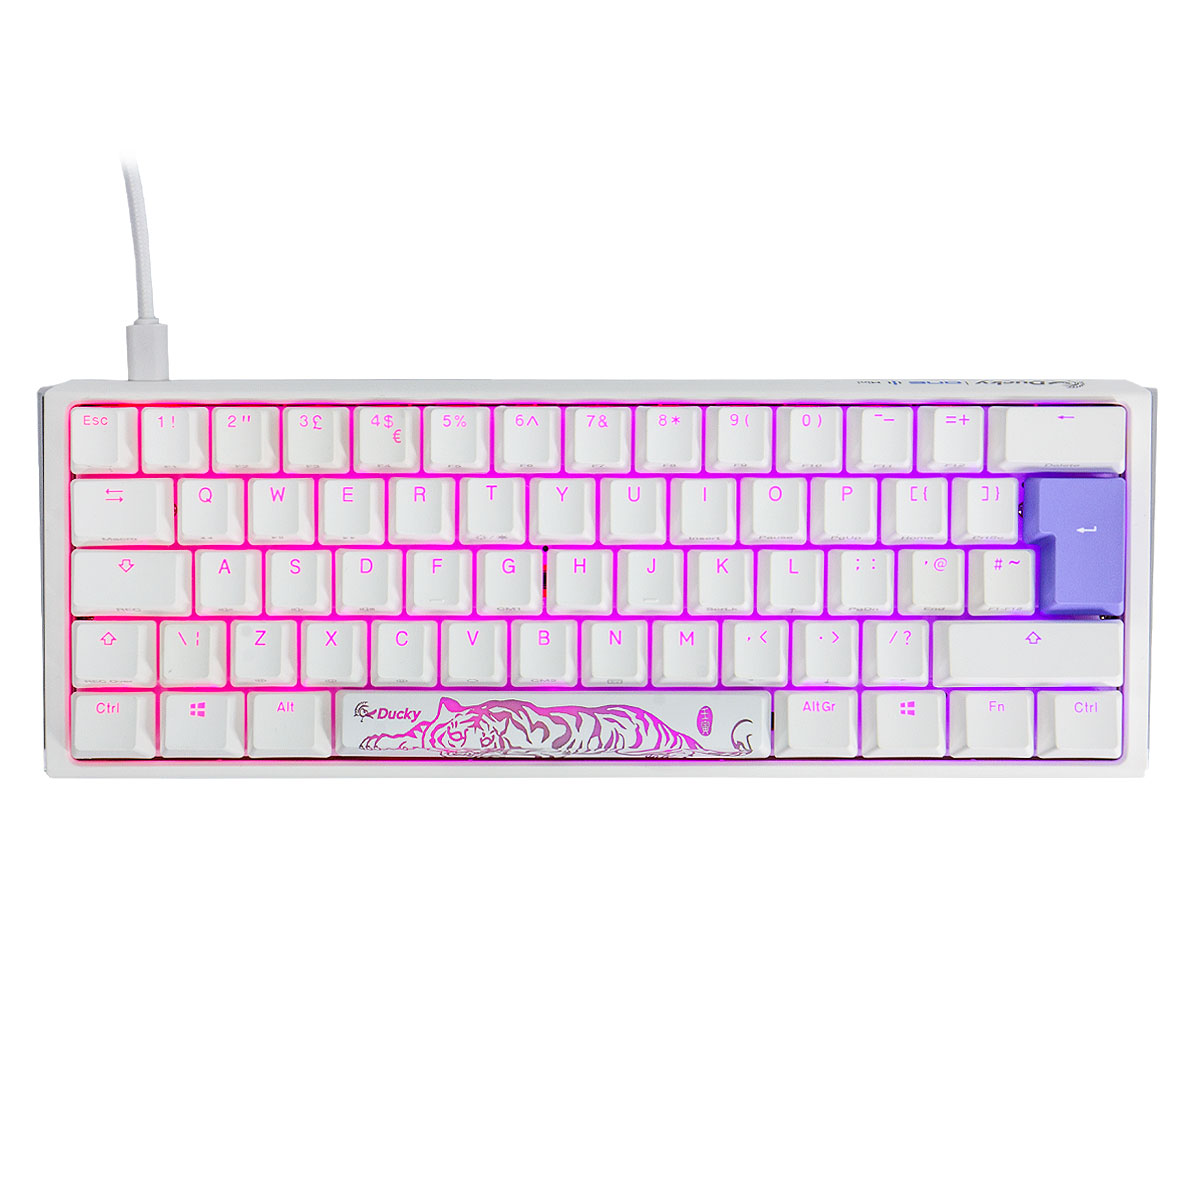 Ducky One 3 Classic 60 USB RGB Mechanical Gaming Keyboard Cherry Blue - Pure White UK Layout